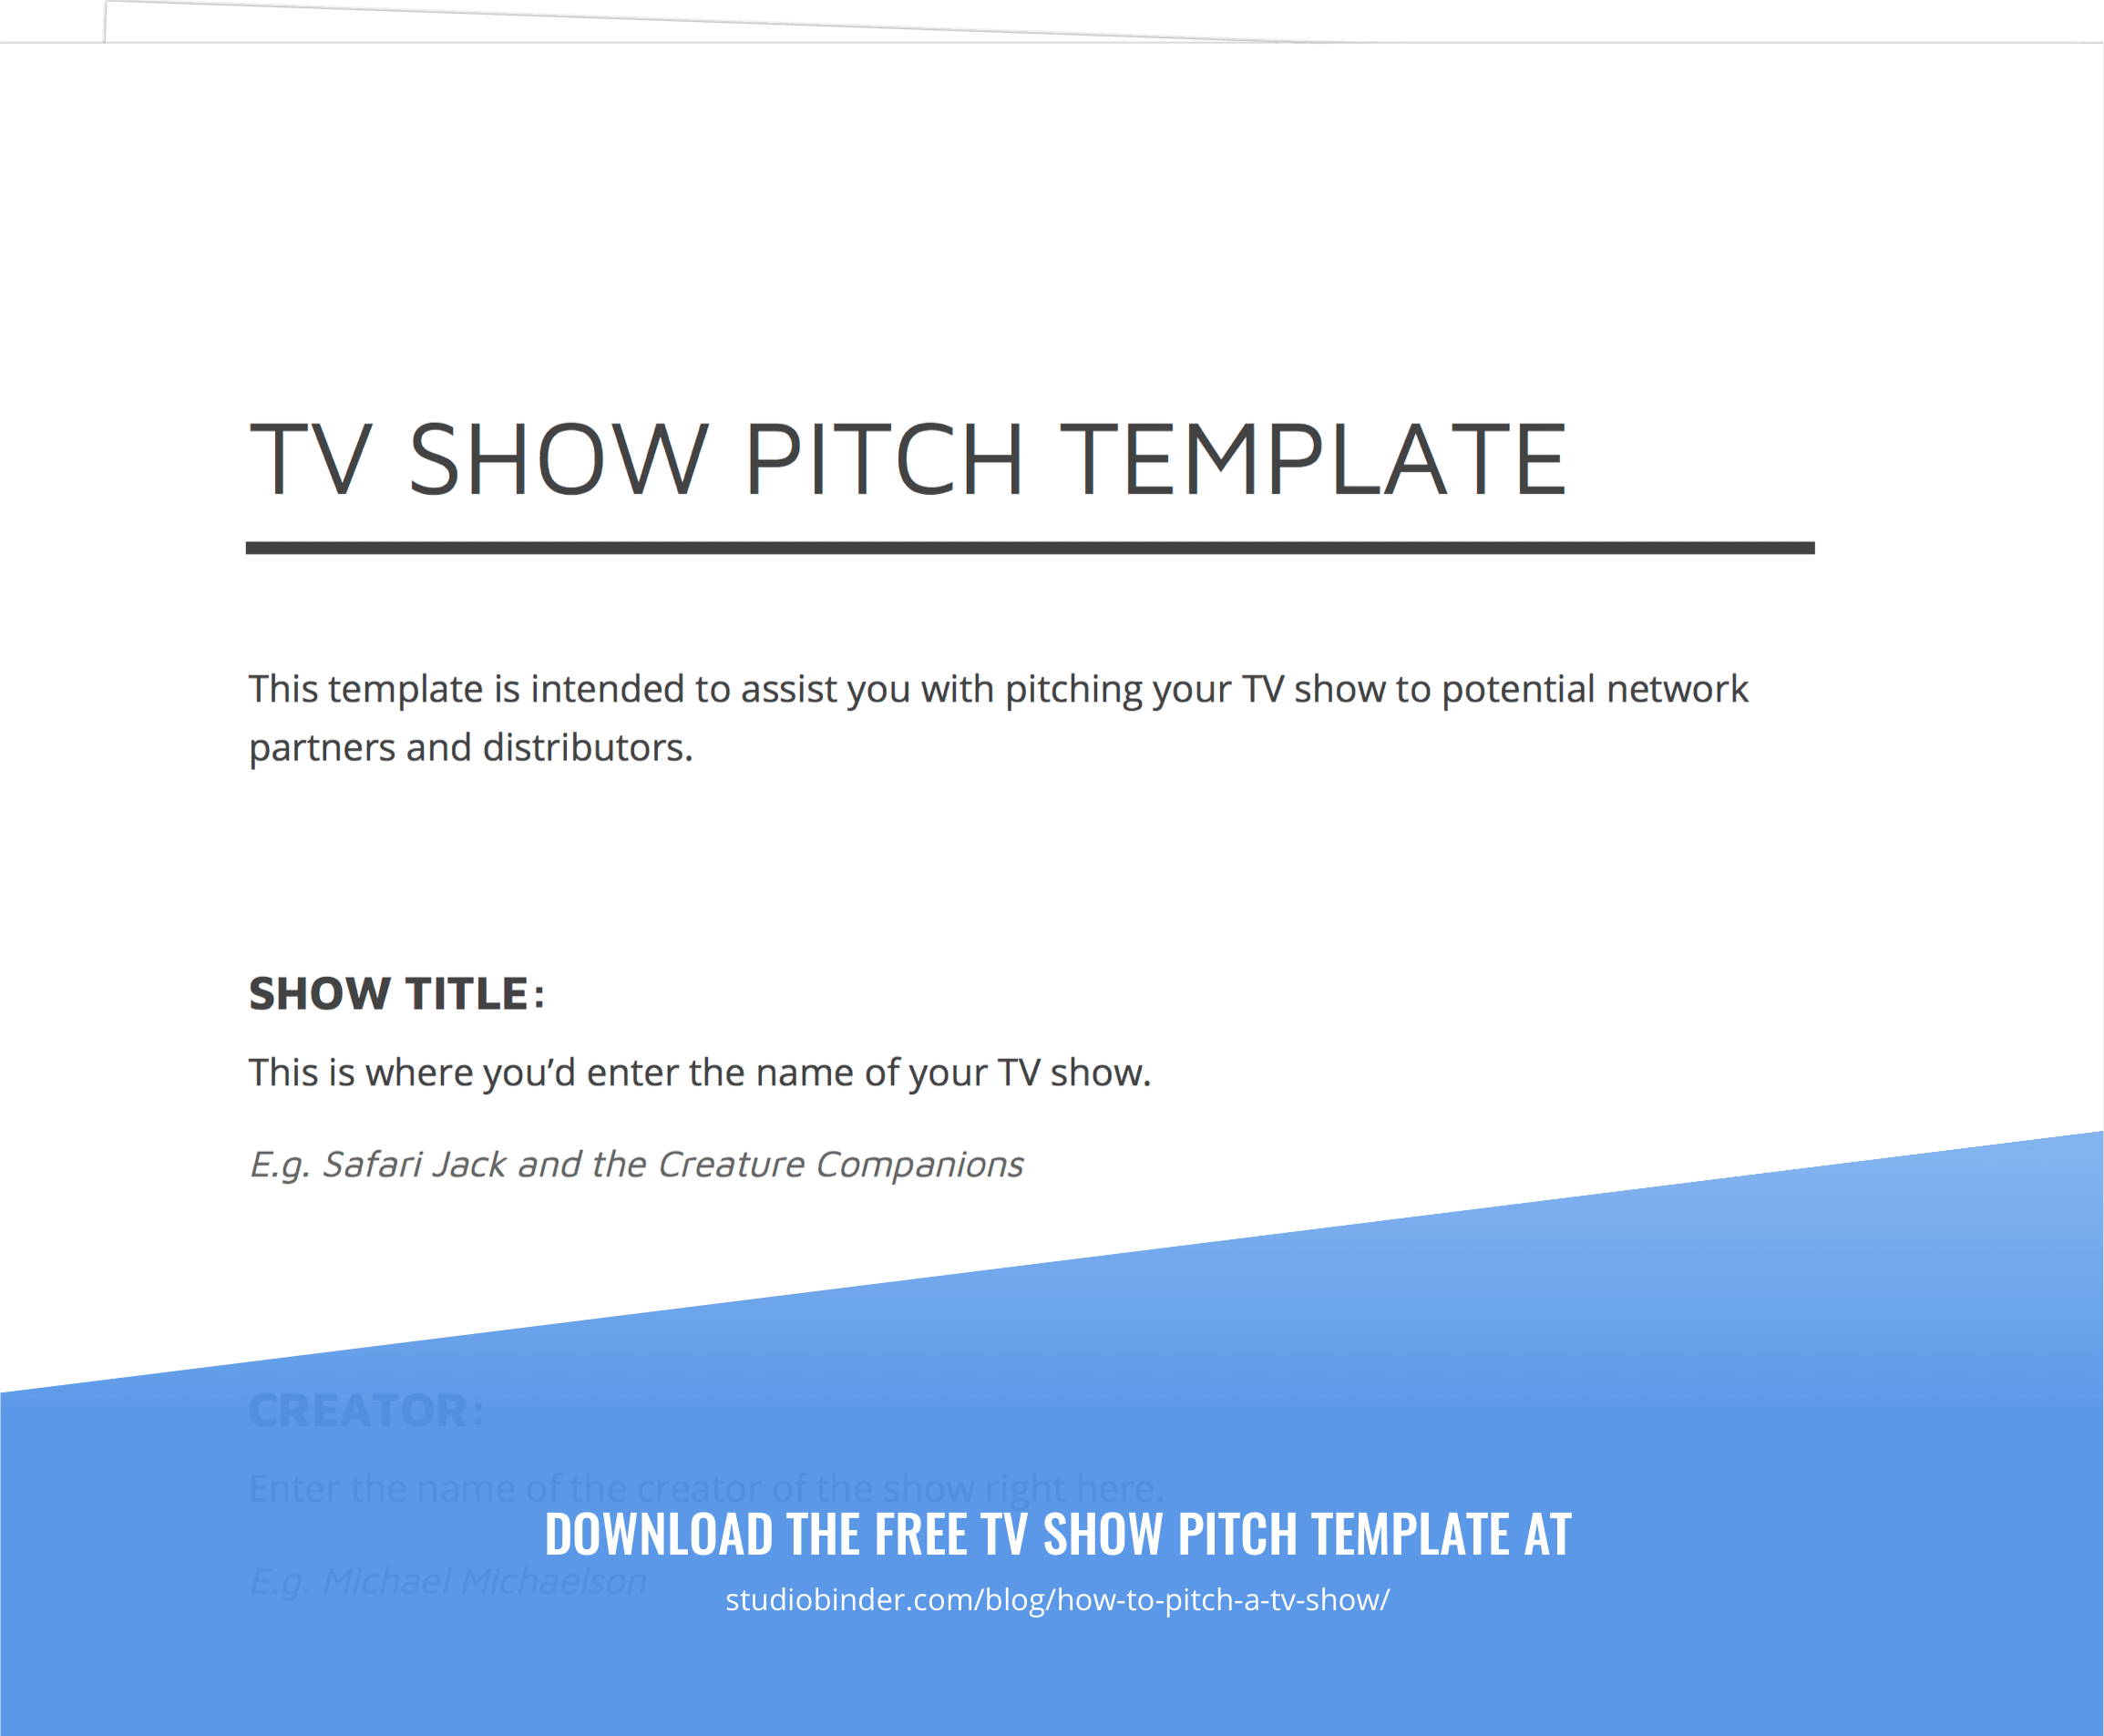 How to Pitch a TV Show Like a Pro [Free Pitch Template]